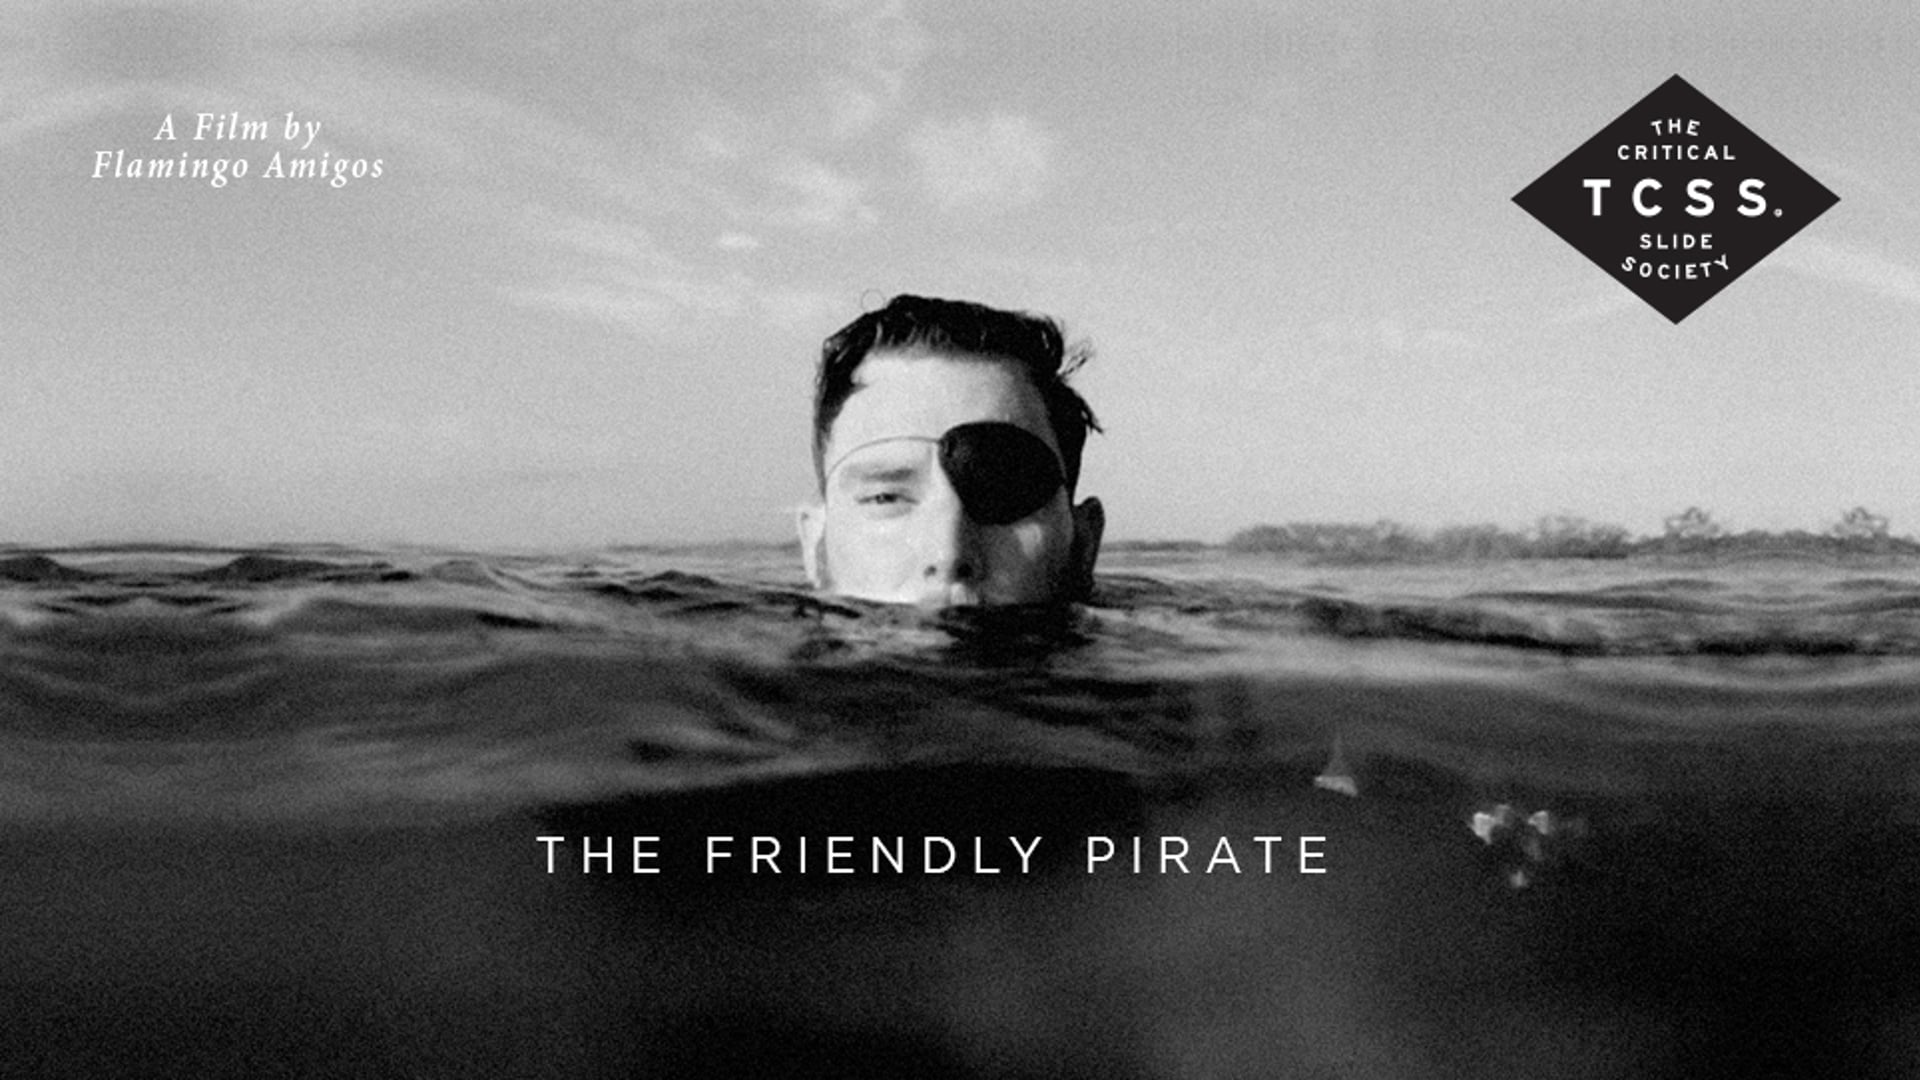 THE FRIENDLY PIRATE